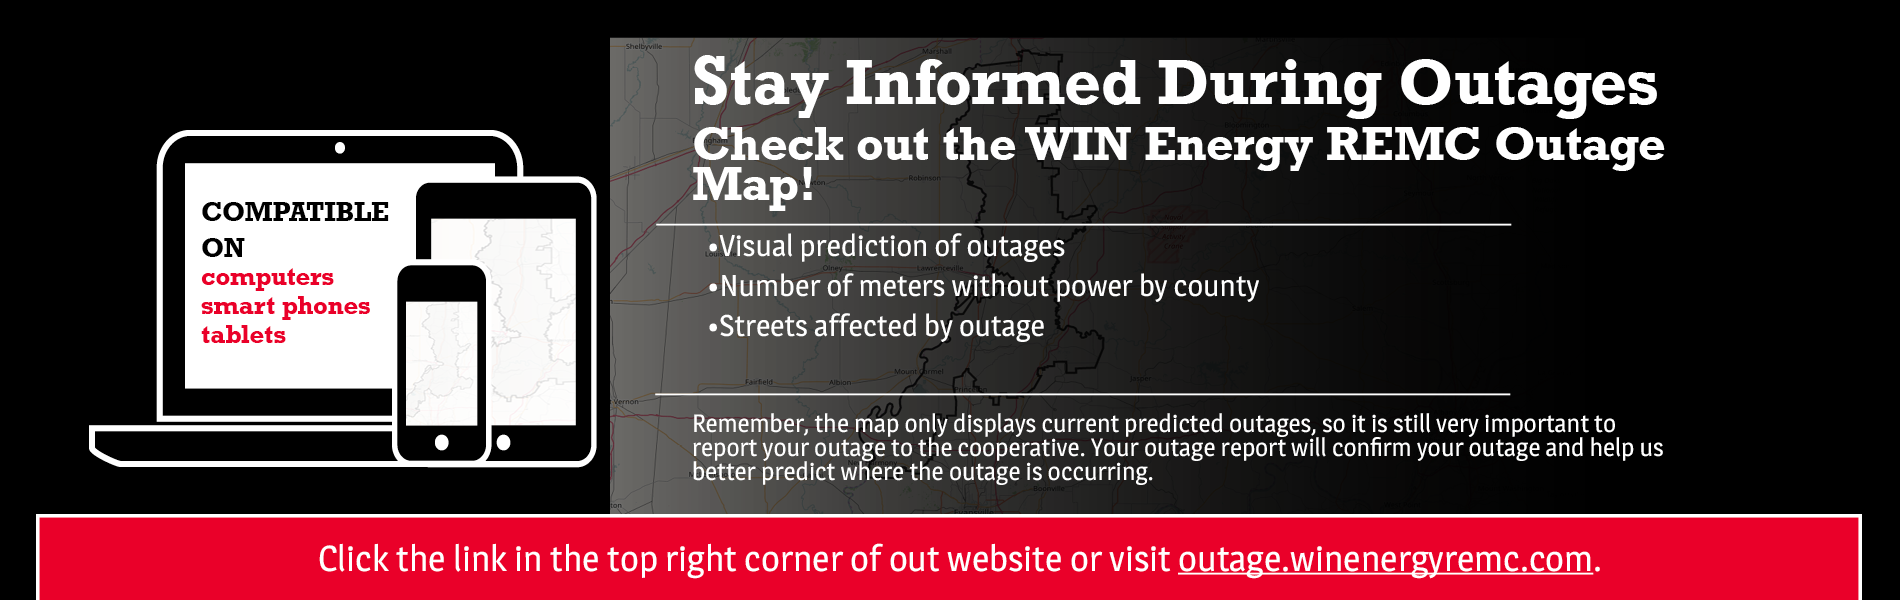 White wording on a dark background explaining the WIN Energy REMC Outage Map with computer, cell phone, and tablet on the lefthand side